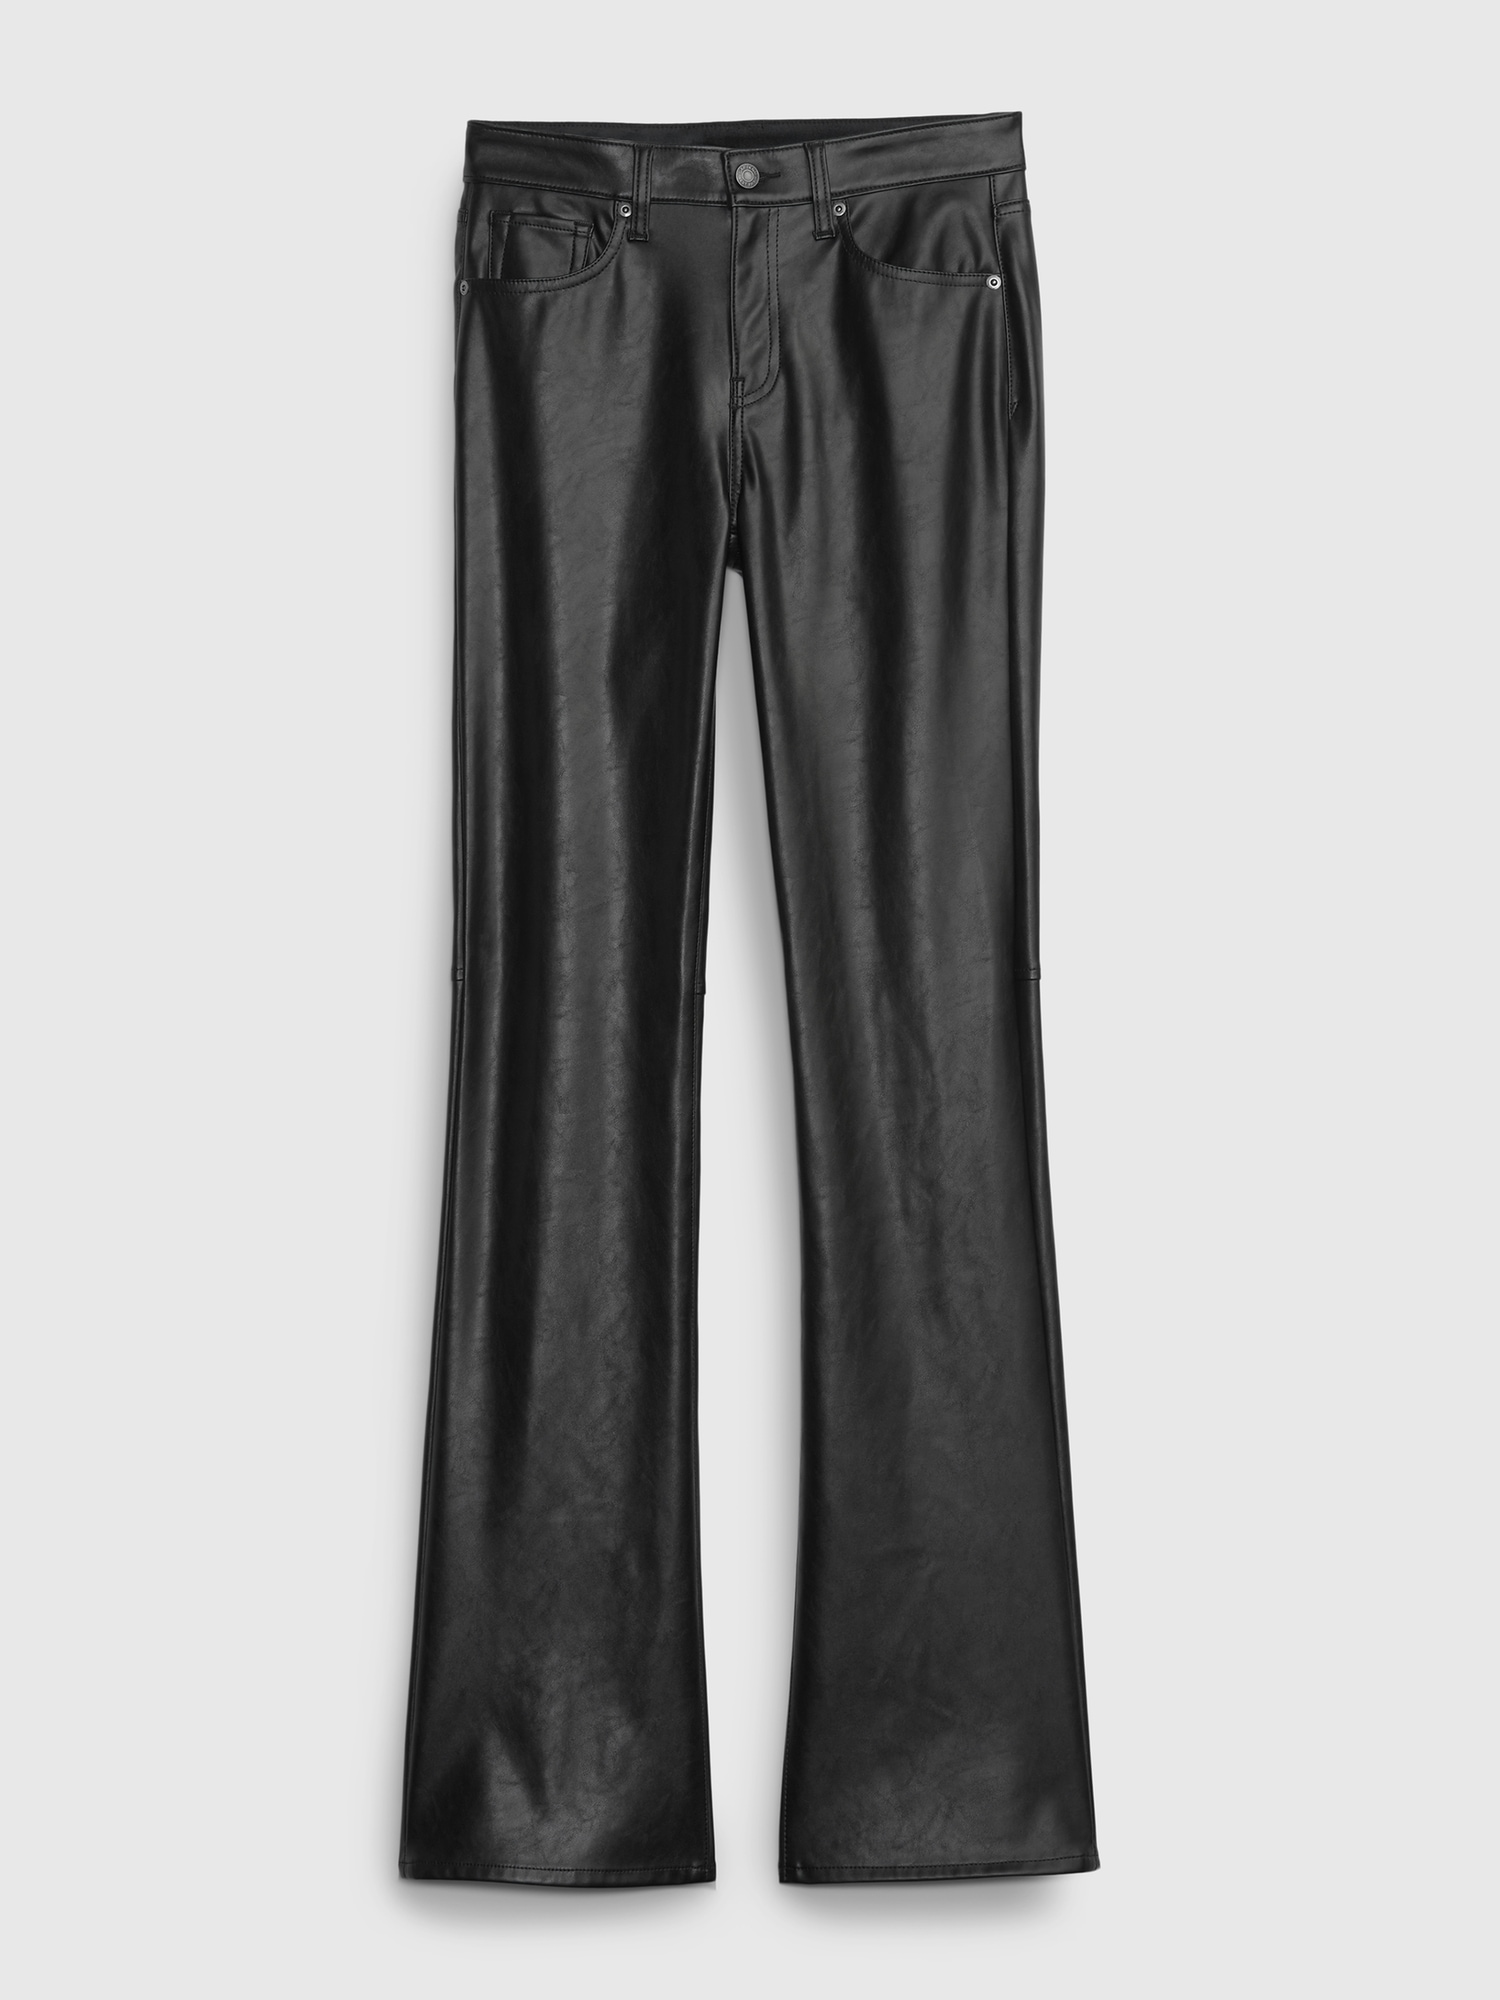 Gap - Maternity Solid Black Faux Leather Pants Size M (Maternity) - 72% off